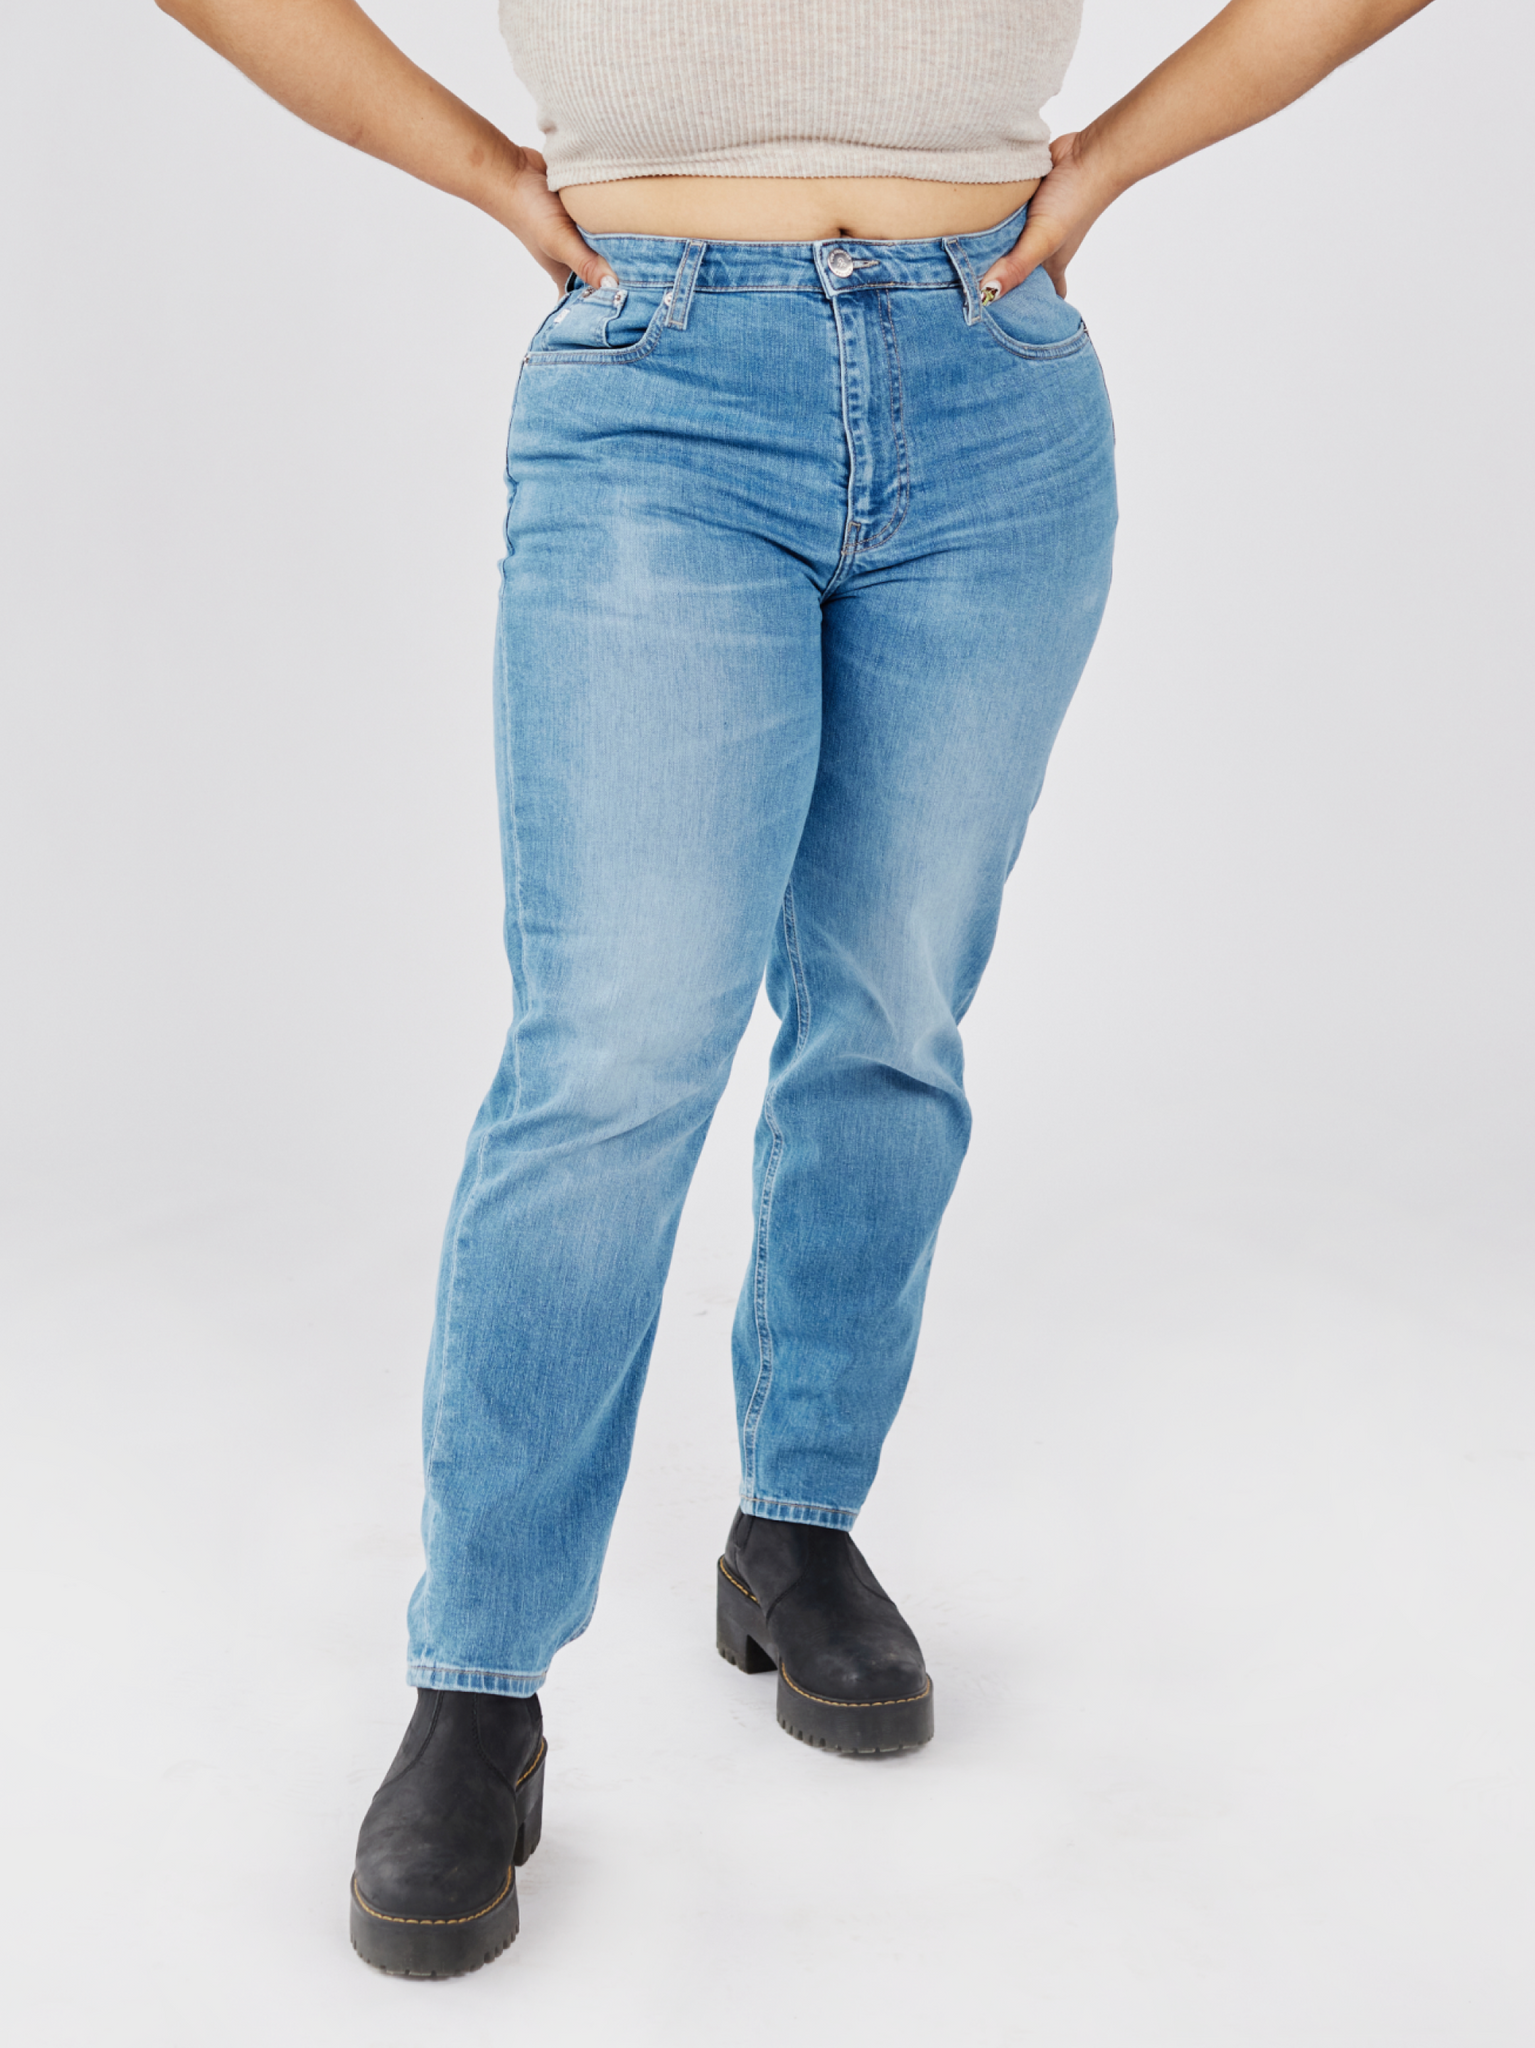 Women's Stretch Tapered Jean - Washed Stone Blue